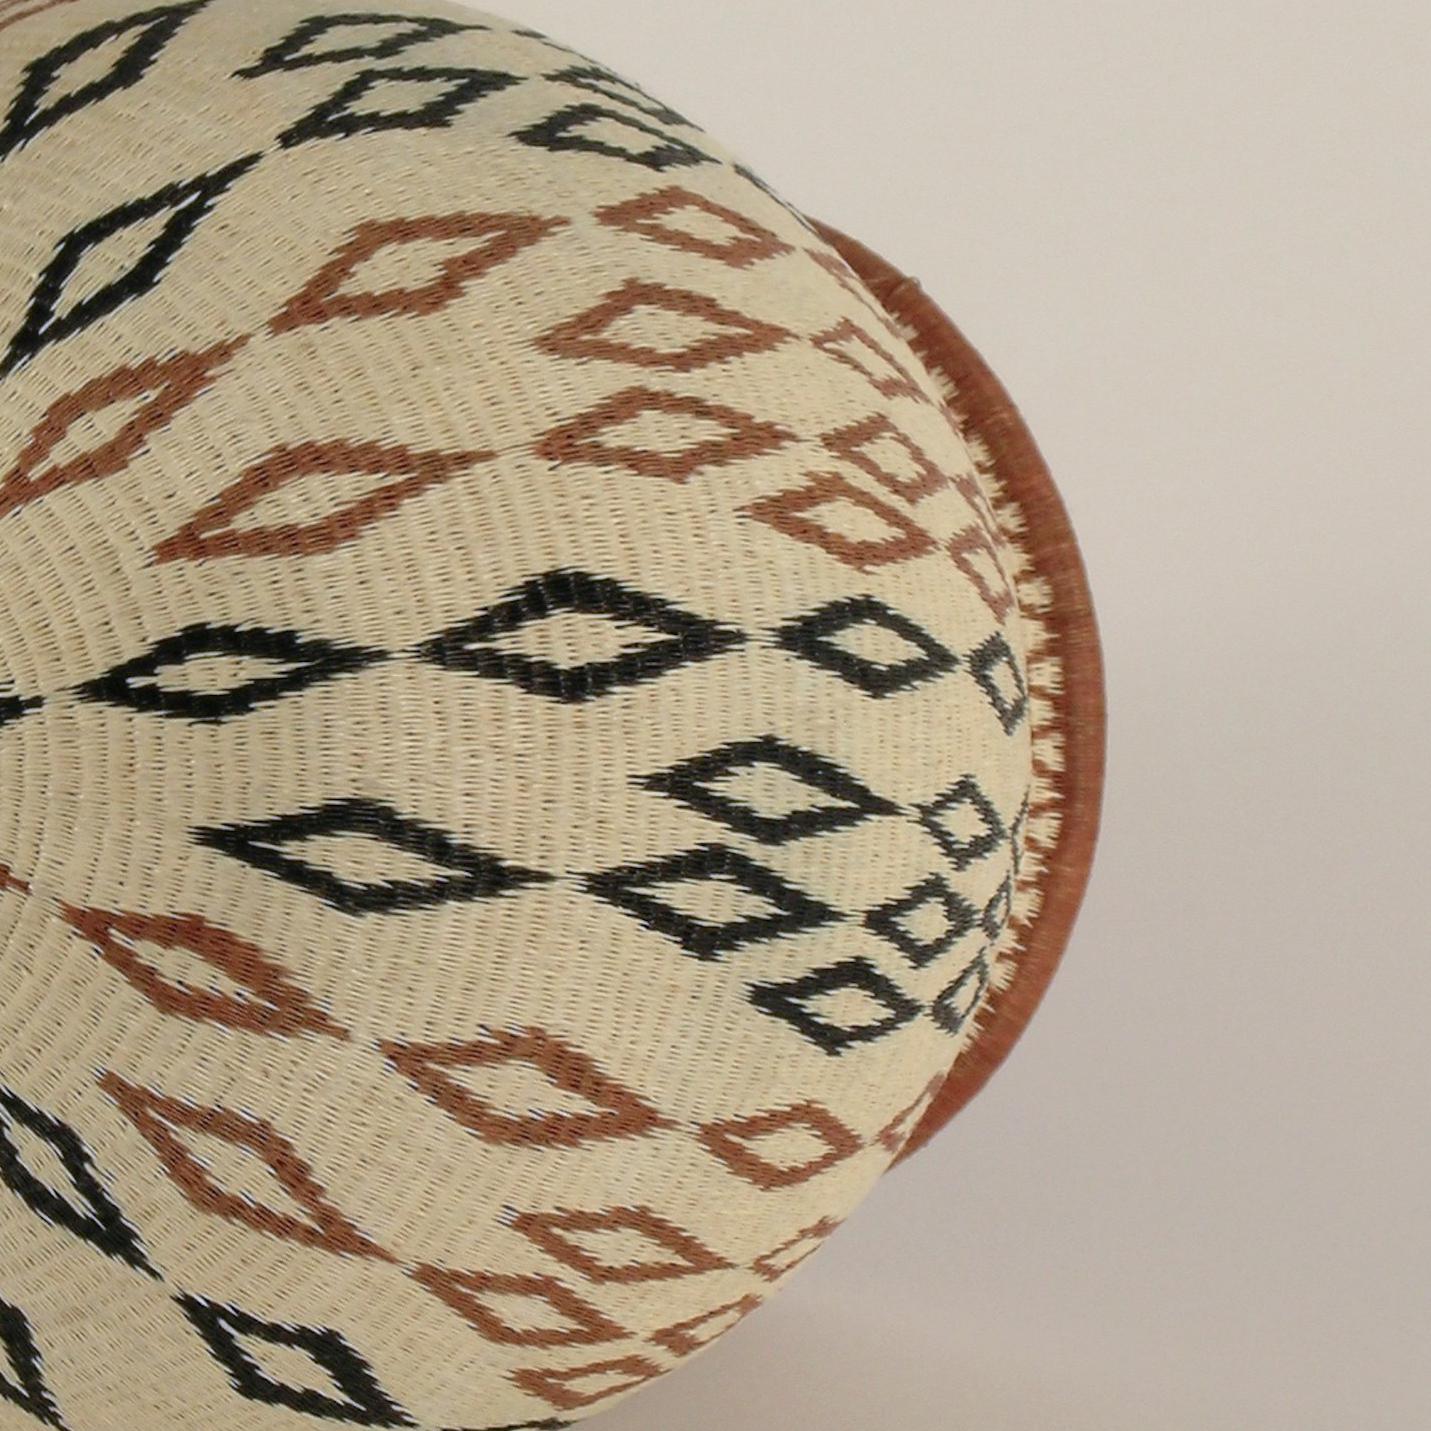 Rain forest baskets The baskets are made by the Wounaan and Embera Indians from the Darien Rainforest in Panama. The Wounaan believe they emerged from the palm tree. They weave baskets from palm fiber and use natural dyes. The dyes are made from